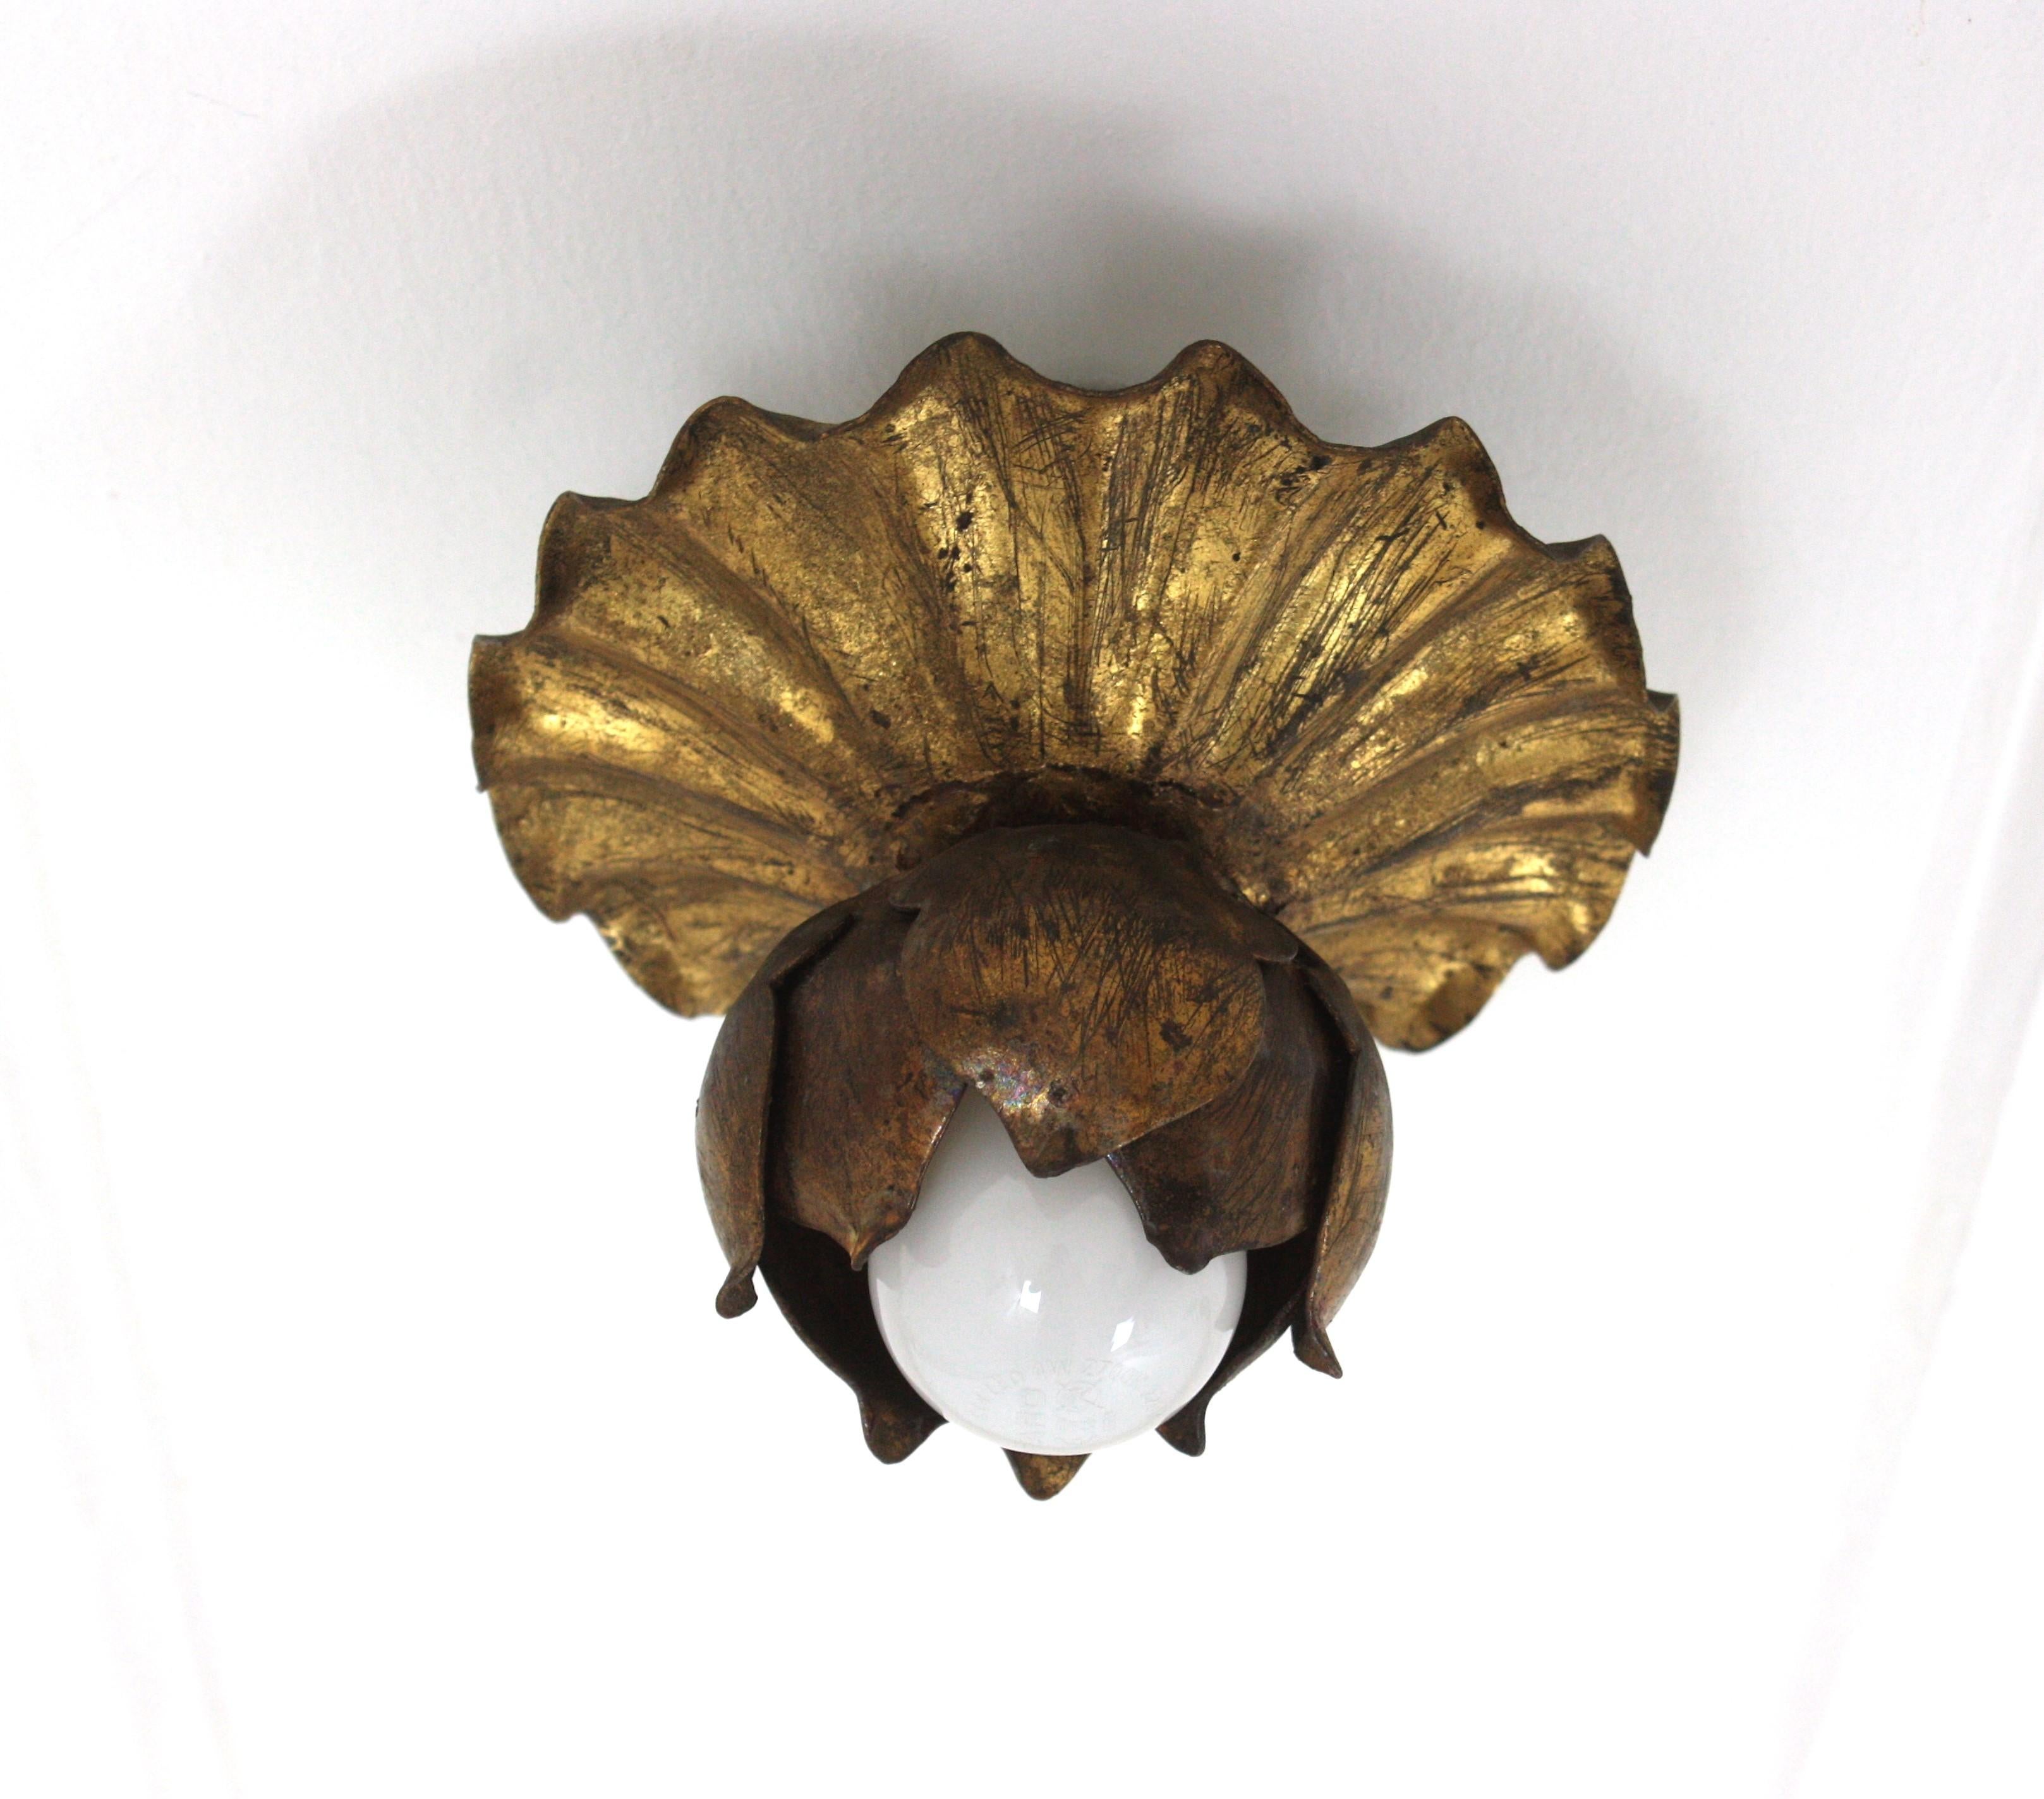 Single Light Flower Bud Ceiling Light Fixture / Wall Light, Gilt Iron, Gold Leaf
France, 1950s
A beautiful Hollywood Regency gilt wrought iron floral flush mount or wall sconce. This lovely light fixture features an scalloped round backplate with